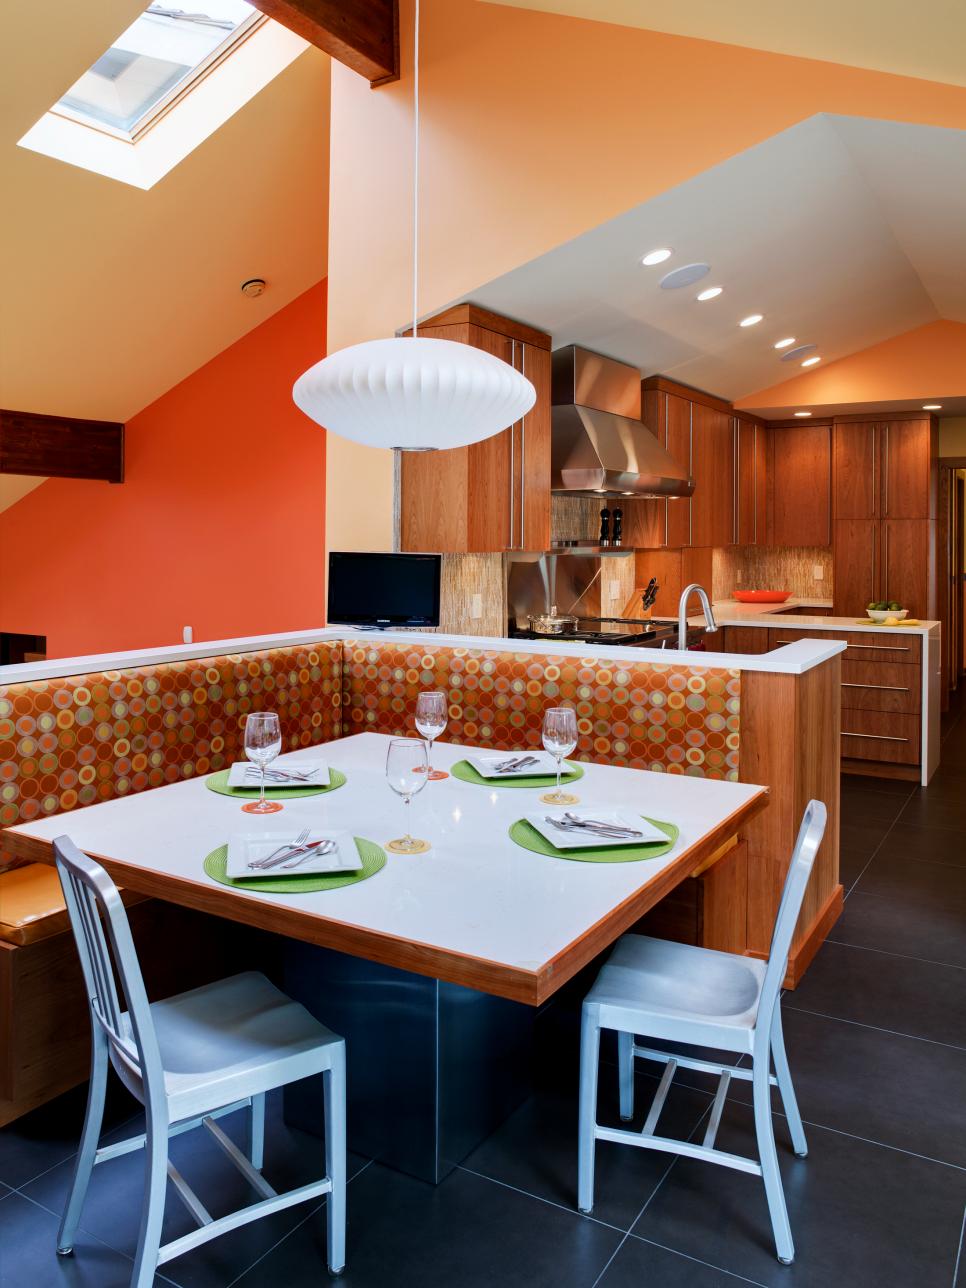 Yellow & Orange Eat-In Kitchen With Dotted Banquette, White Pendant